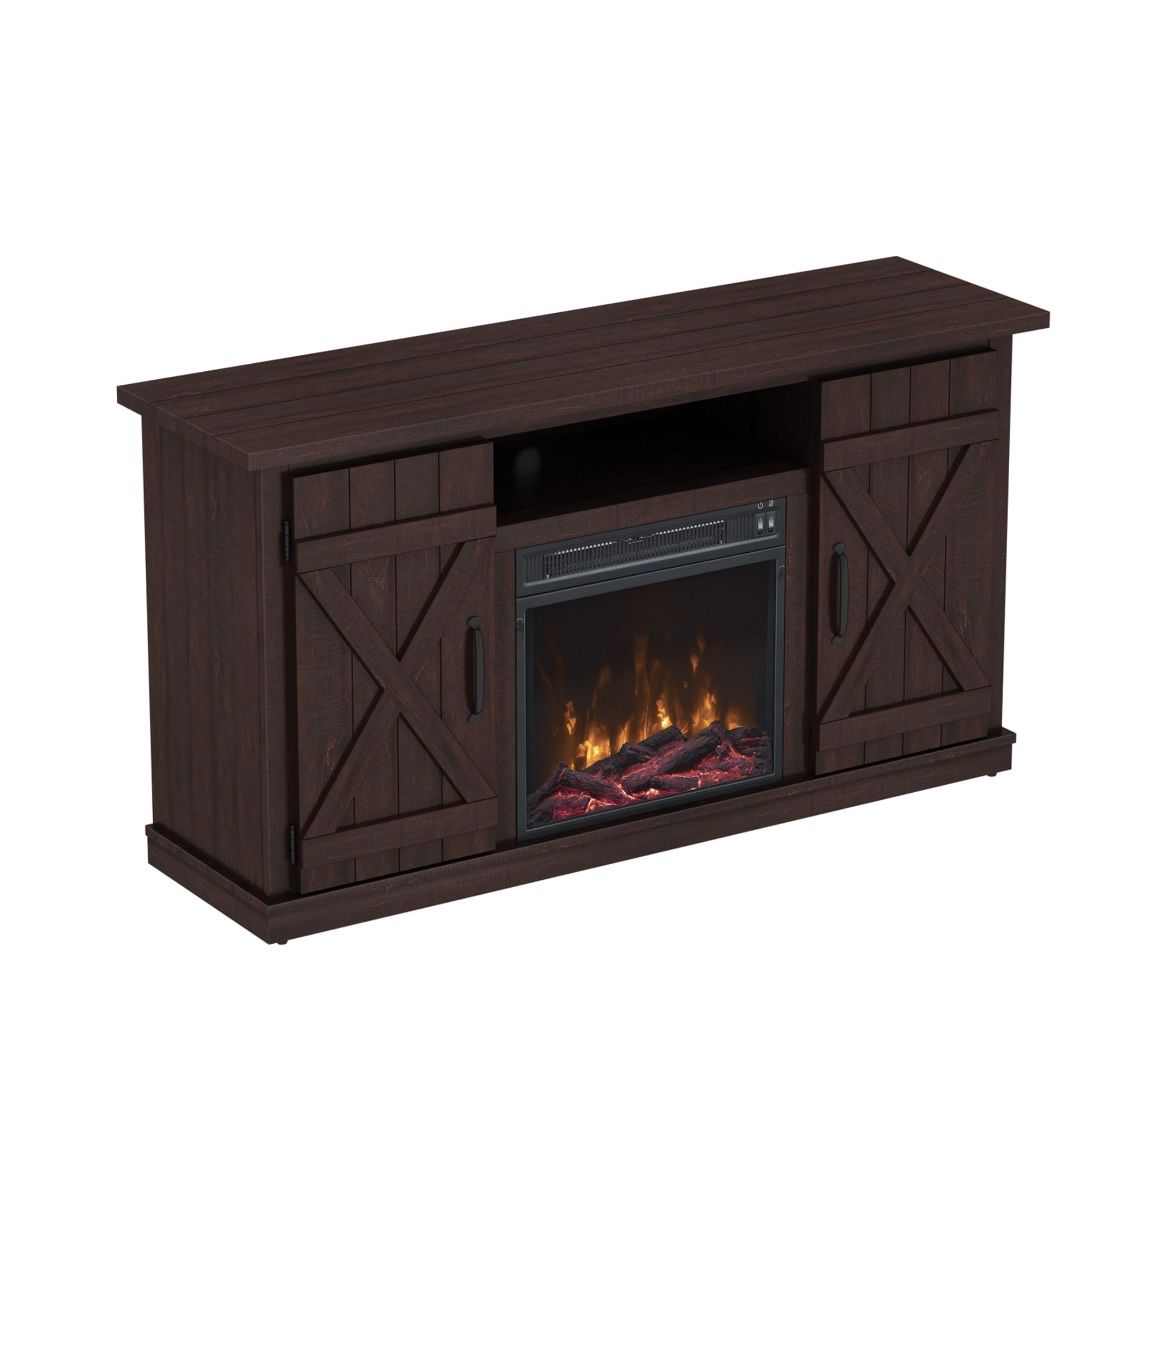 Barn Door TV Stand With Electric Fireplace, Sawcut Espresso